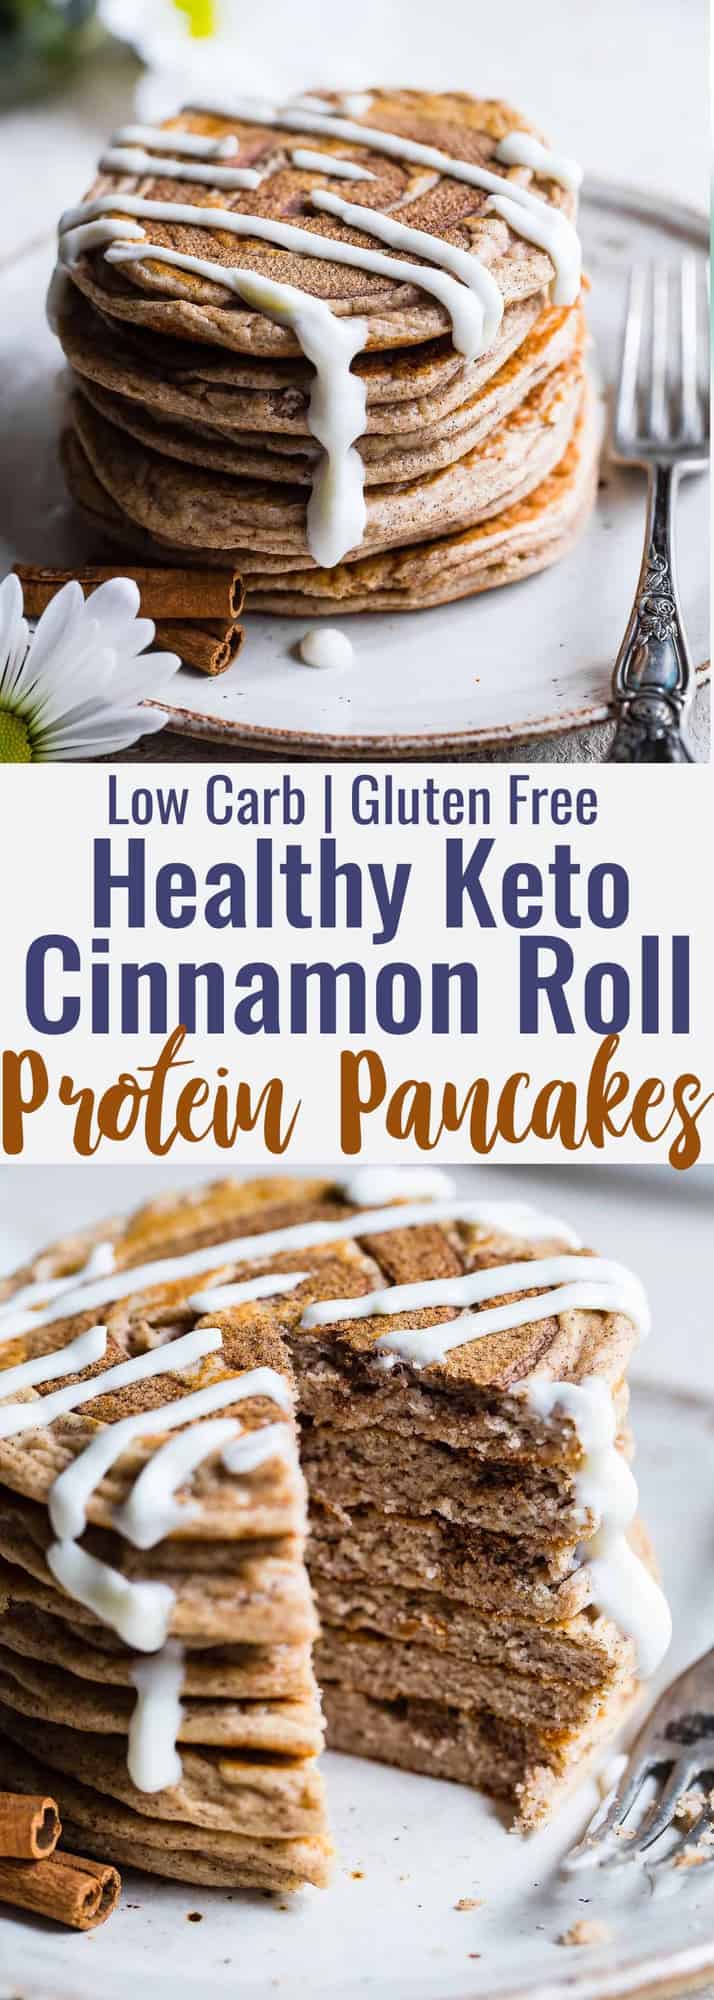 Cinnamon Roll Keto Protein Pancakes - This EASY, low carb, gluten free protein pancakes recipe is going to be your new favorite breakfast! Great for kids and adults and packed with 23g of protein! Who doesn't want to wake up to healthy cinnamon rolls?! | #Foodfaithfitness | #Keto #Lowcarb #Glutenfree #Healthy #Pancakes